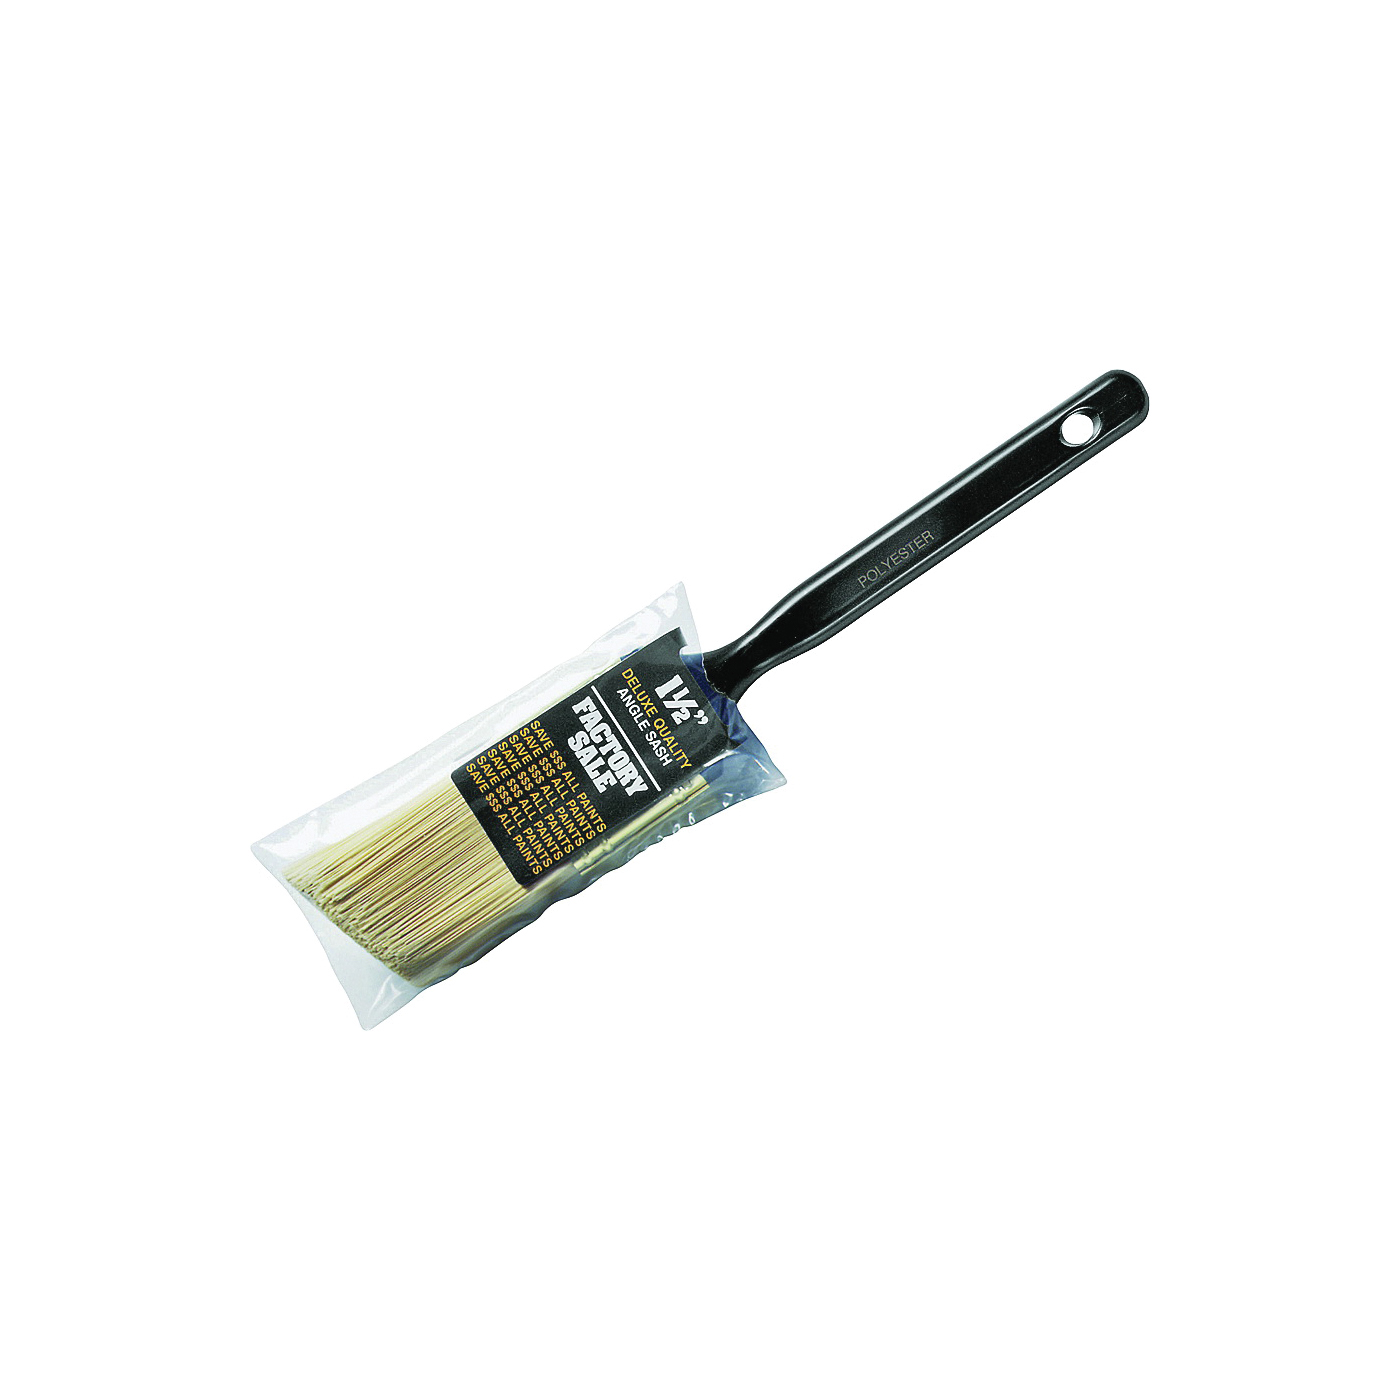 Wooster P3970-1-1/2 Paint Brush, 1-1/2 in W, 2-7/16 in L Bristle, Polyester Bristle, Sash Handle